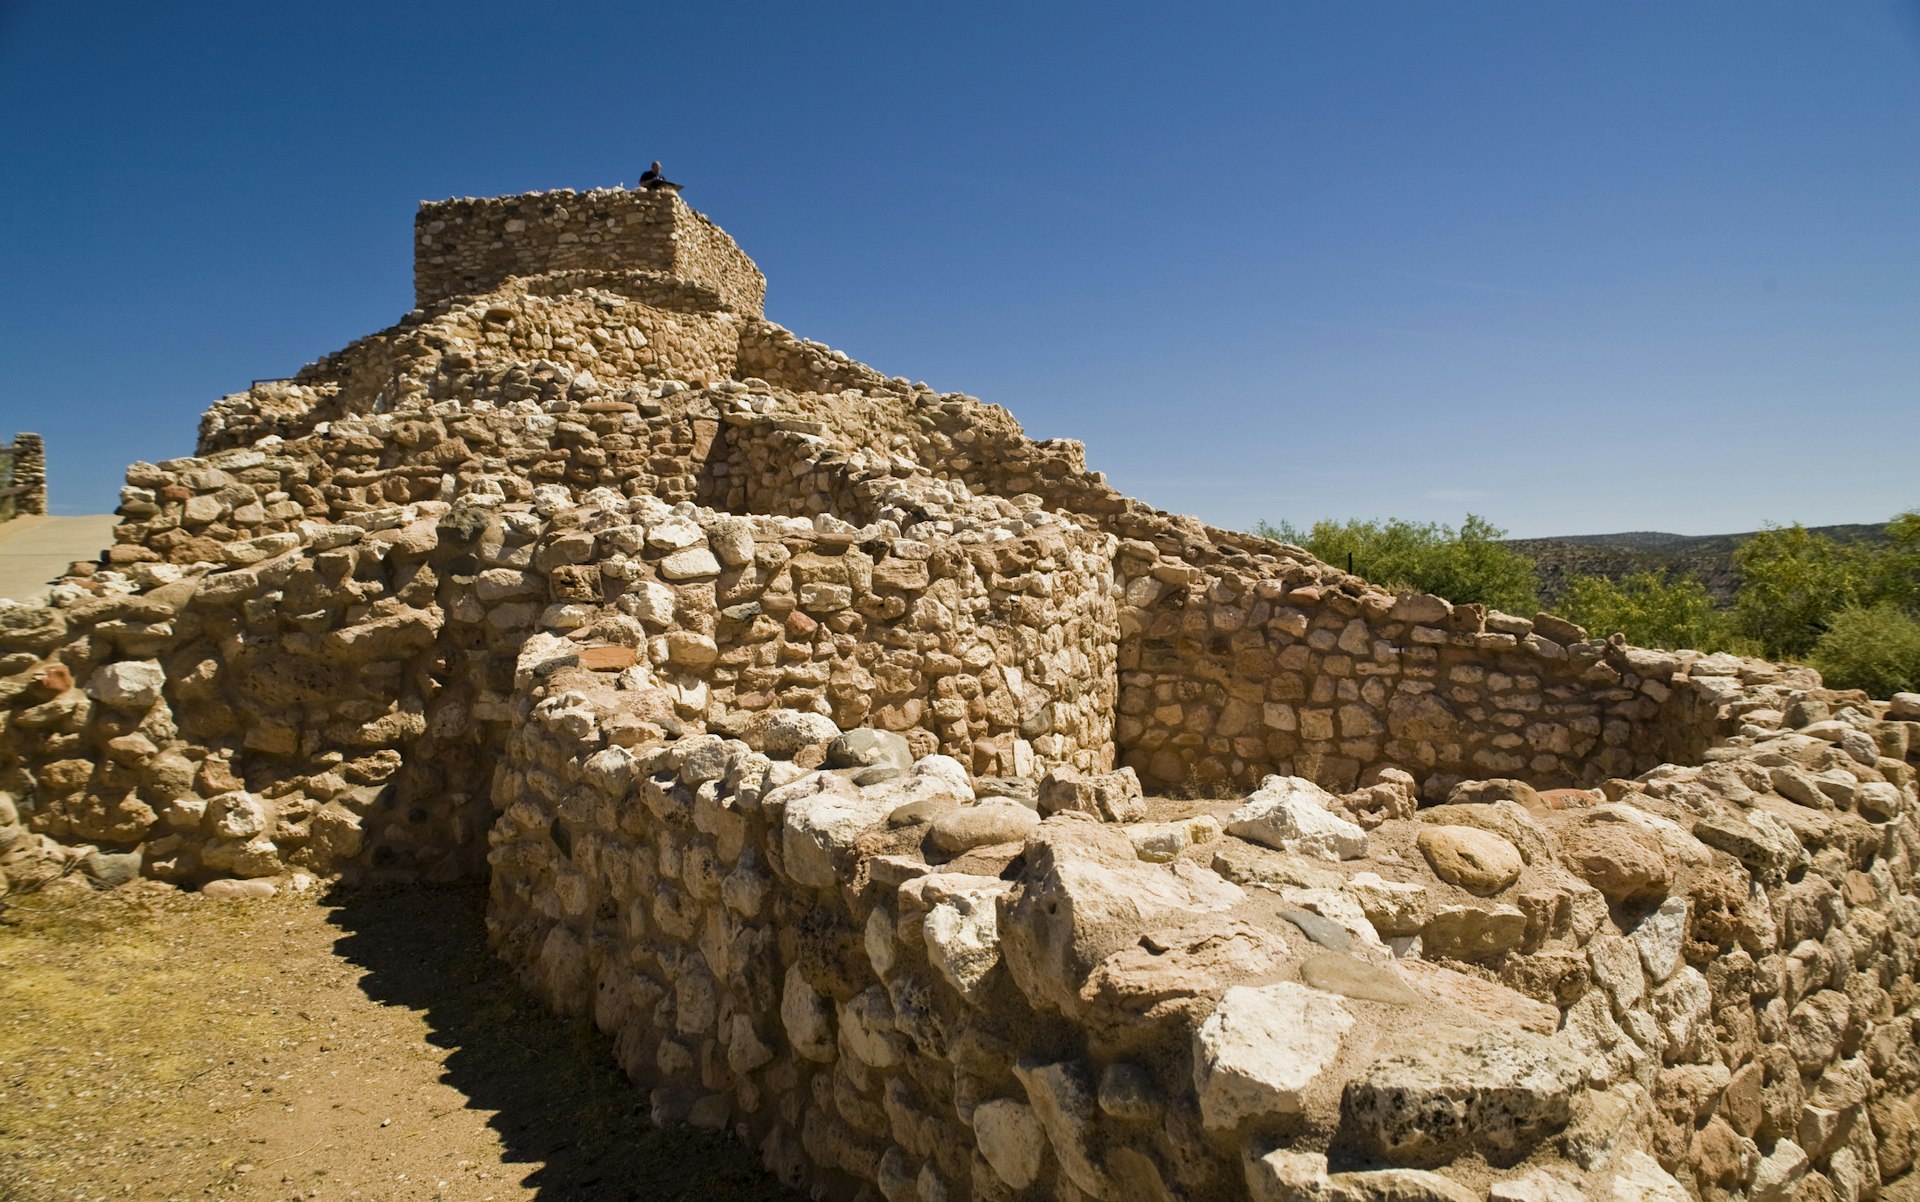 Stone foundations of the pueblo at Tuzigoot National Monument in Arizona on a sunny day